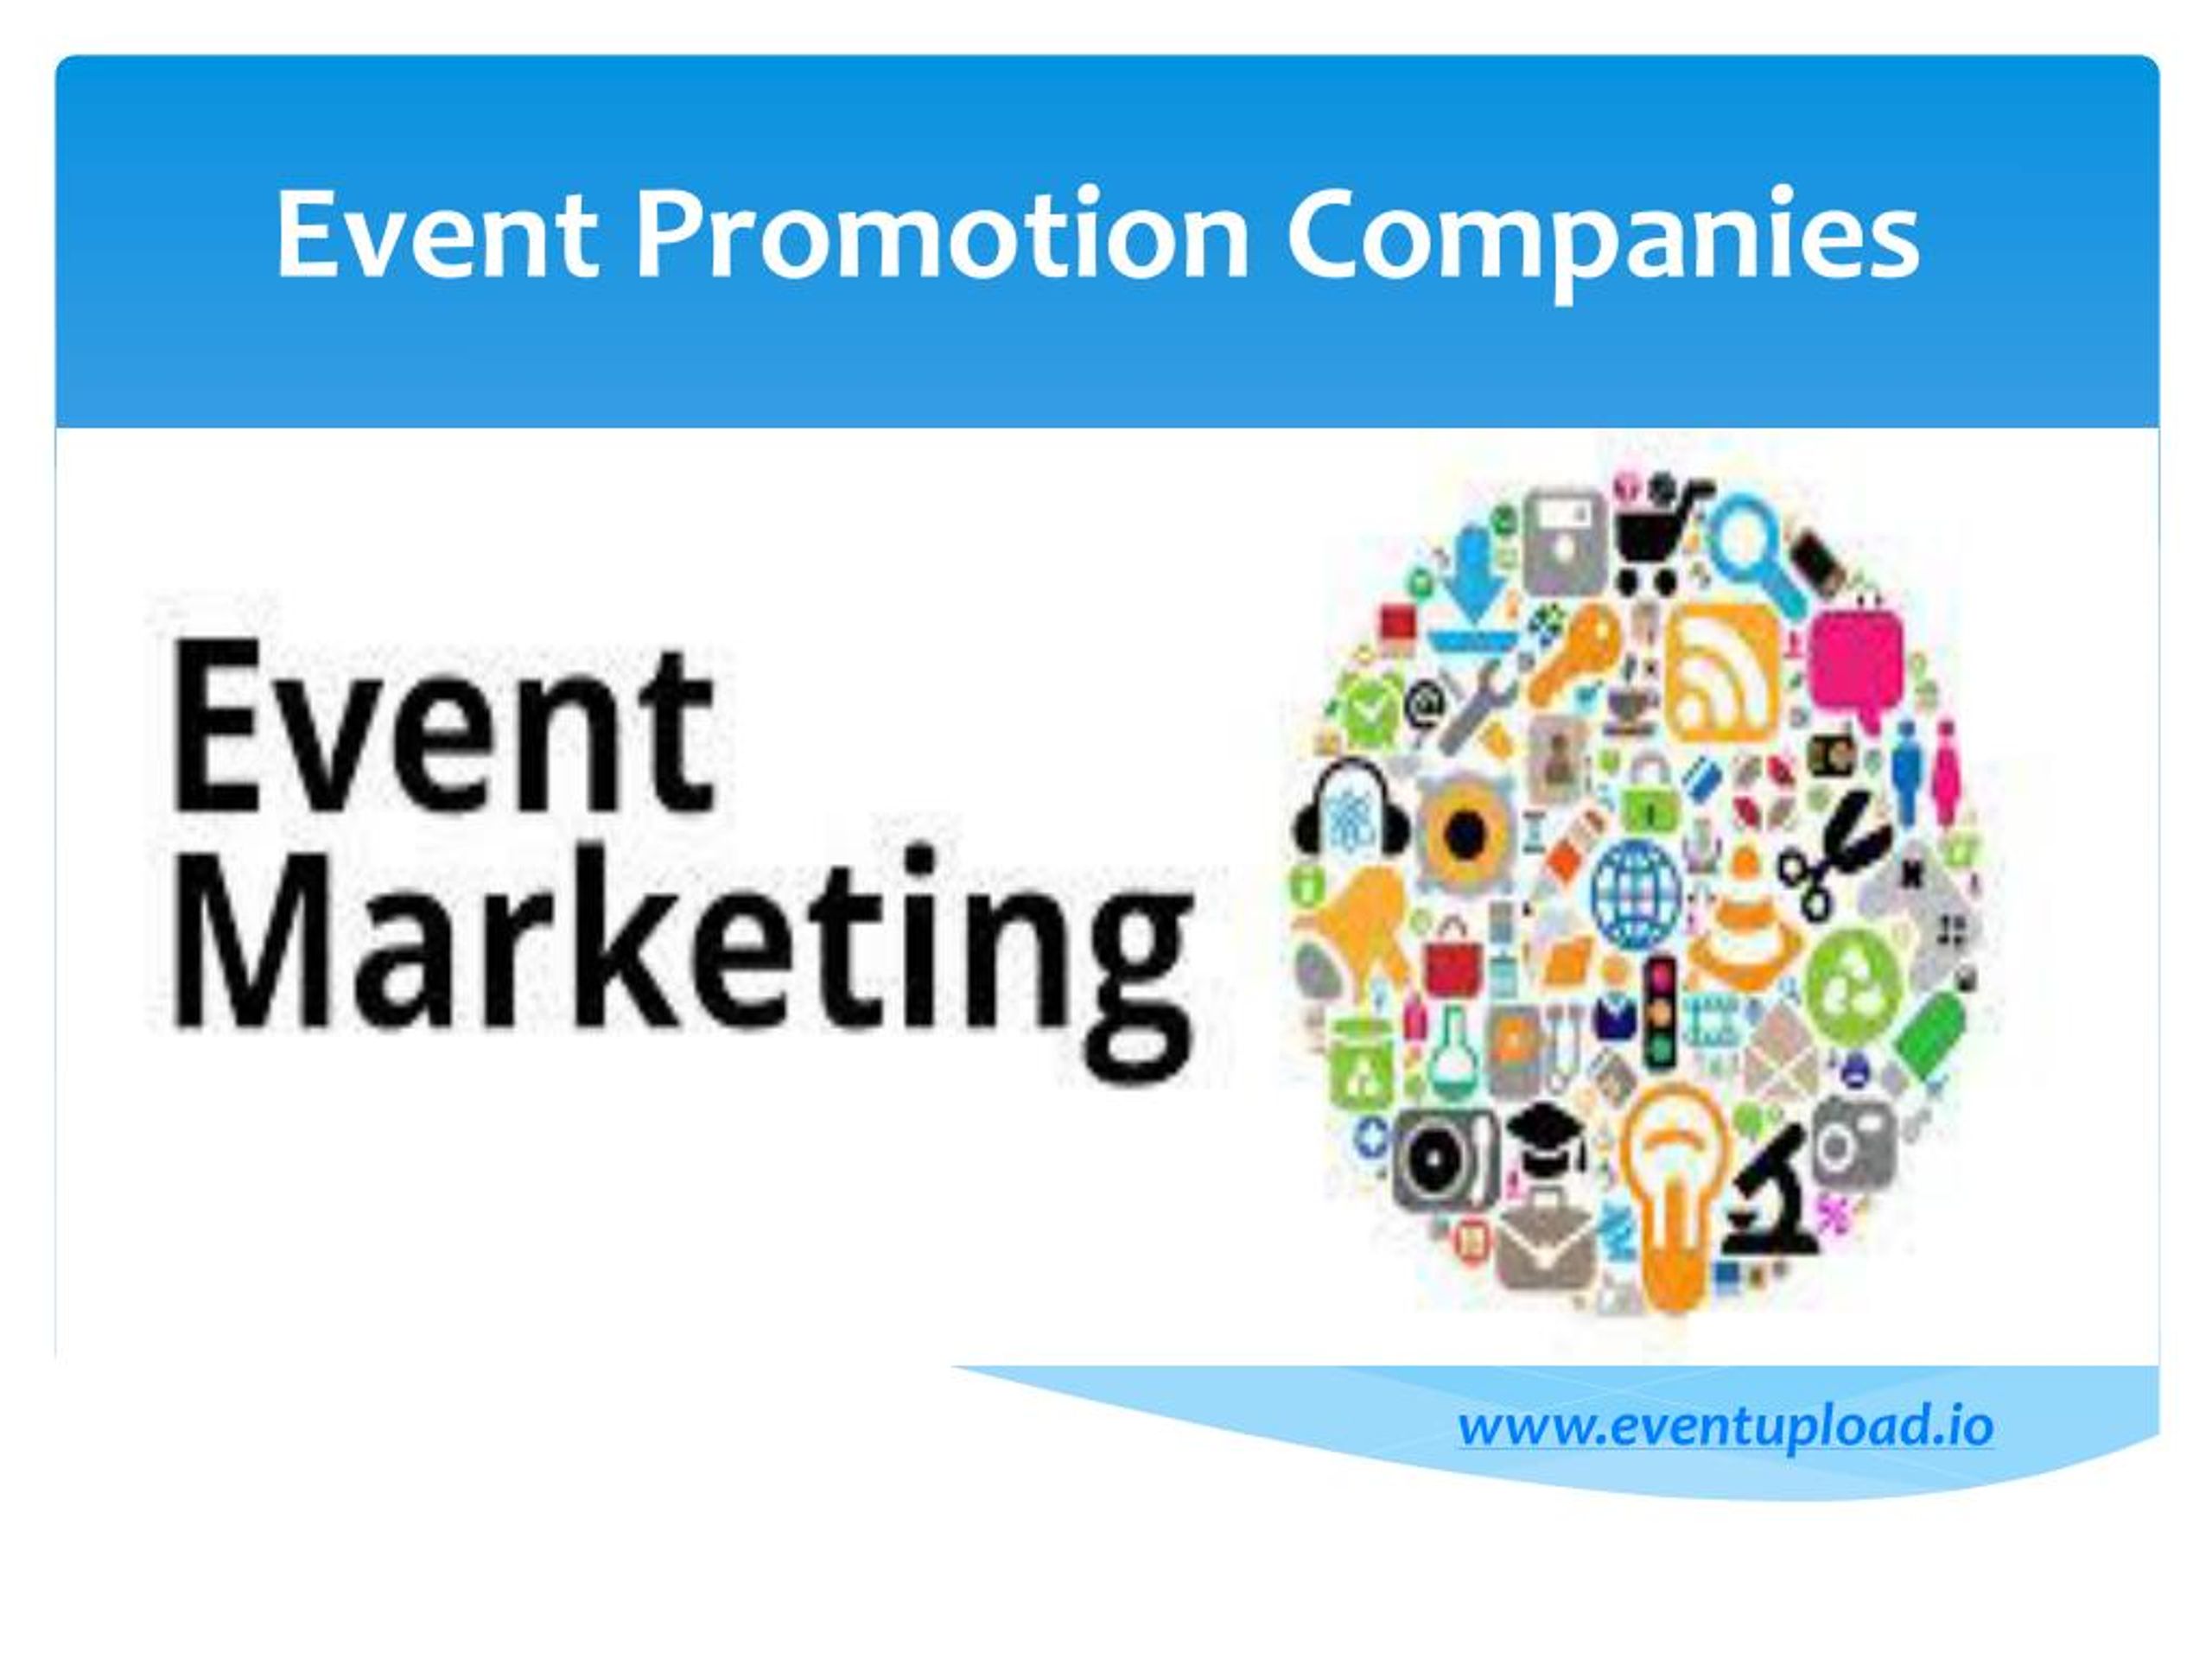 Promotions company